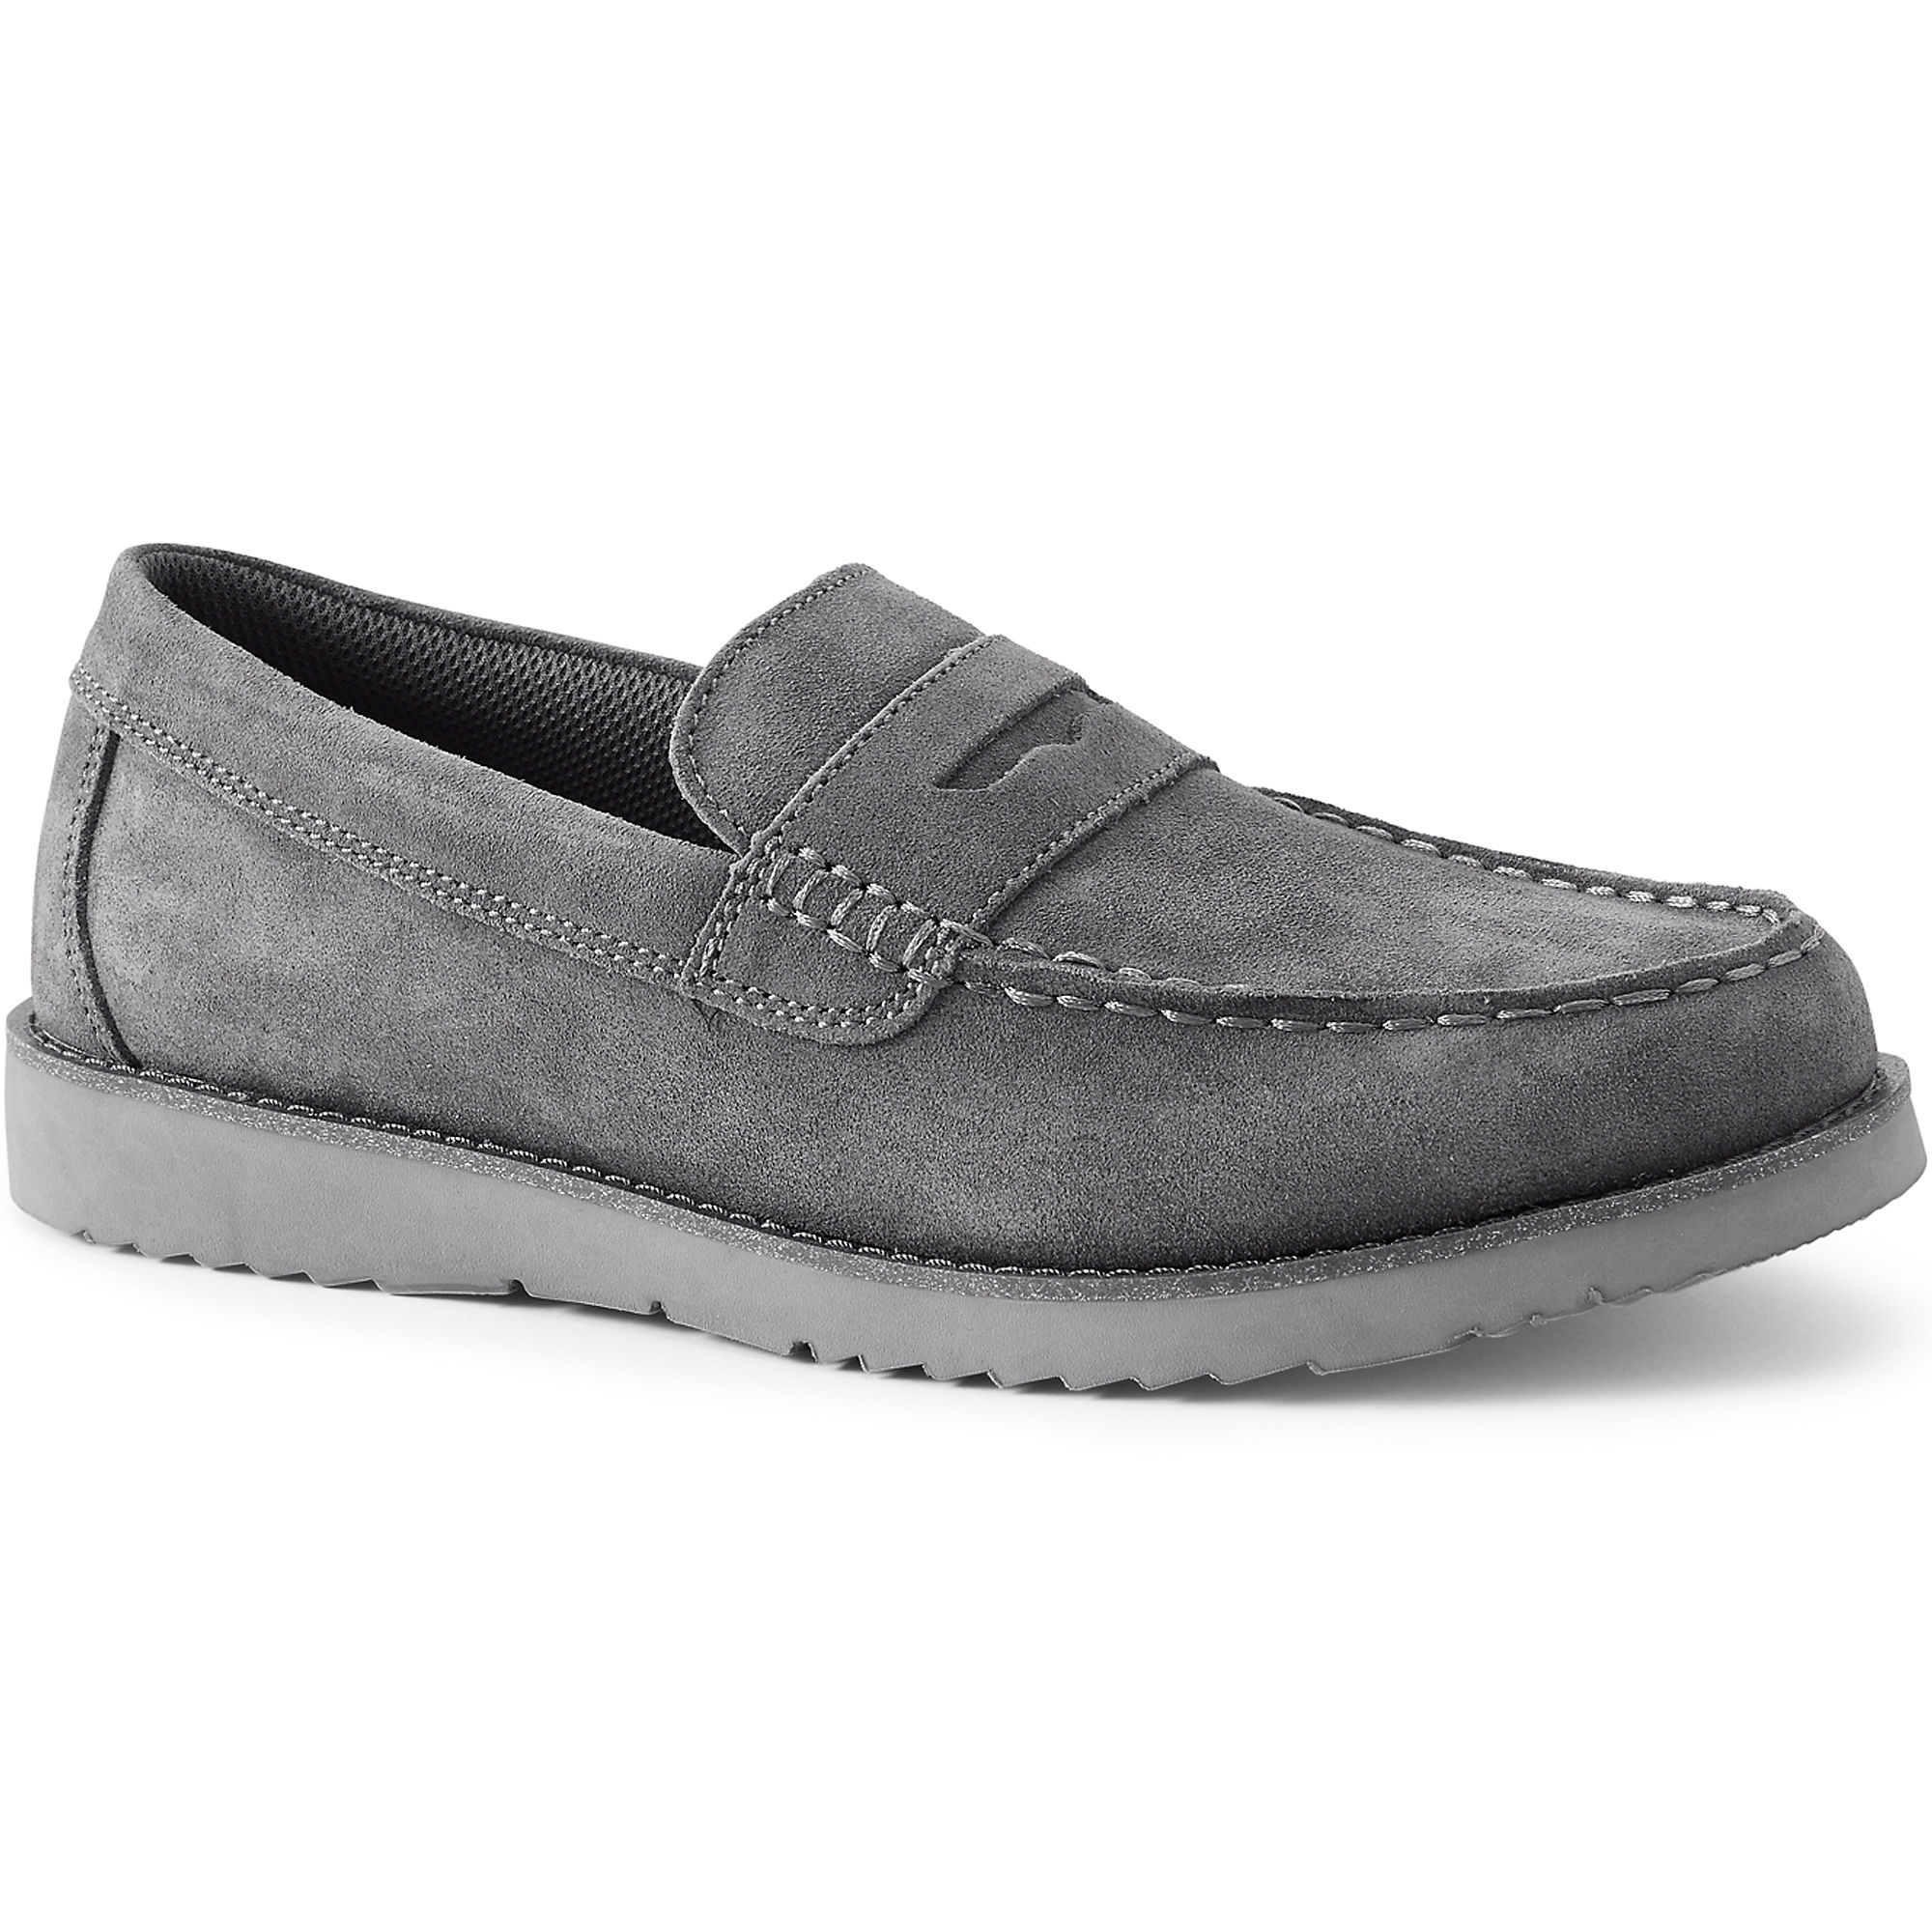 Lands End Men's Comfort Casual Leather Penny Loafers (Arctic Gray Suede)